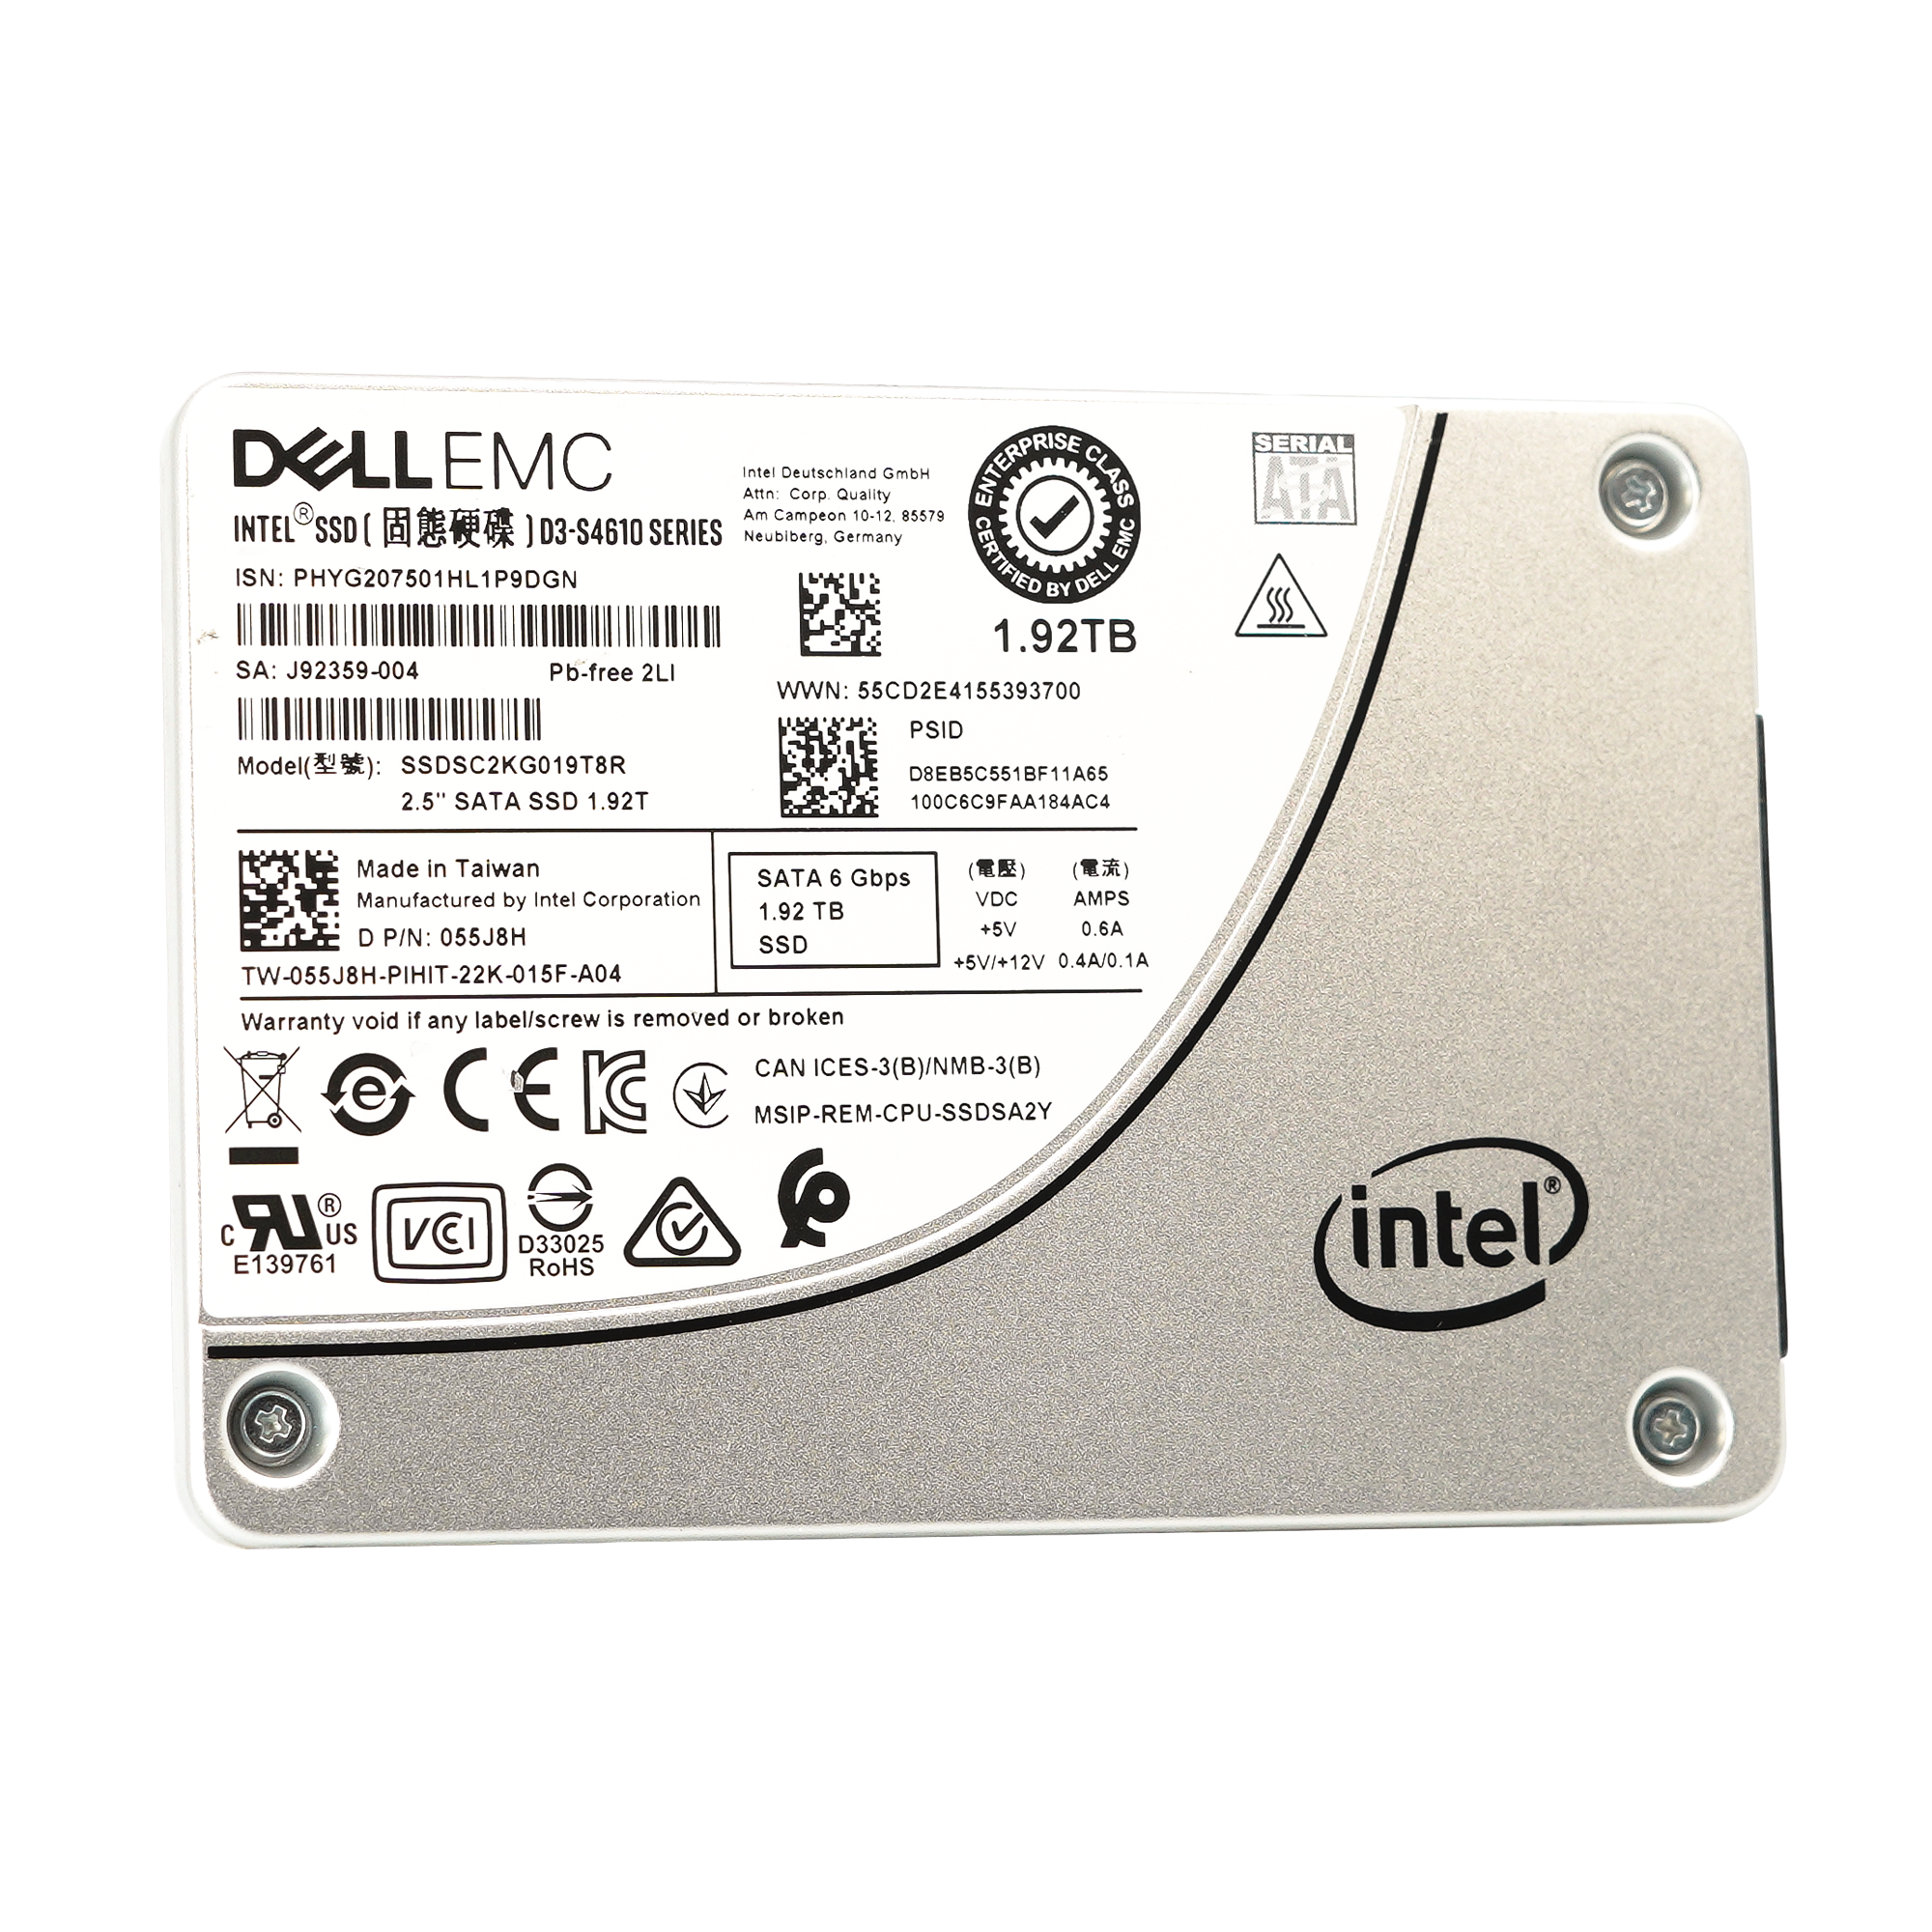 Dell S4610 55J8H SSDSC2KG019T8R 1.92TB SATA 6Gb/s 3DWPD Mixed Use 2.5in Refurbished SSD - Front View